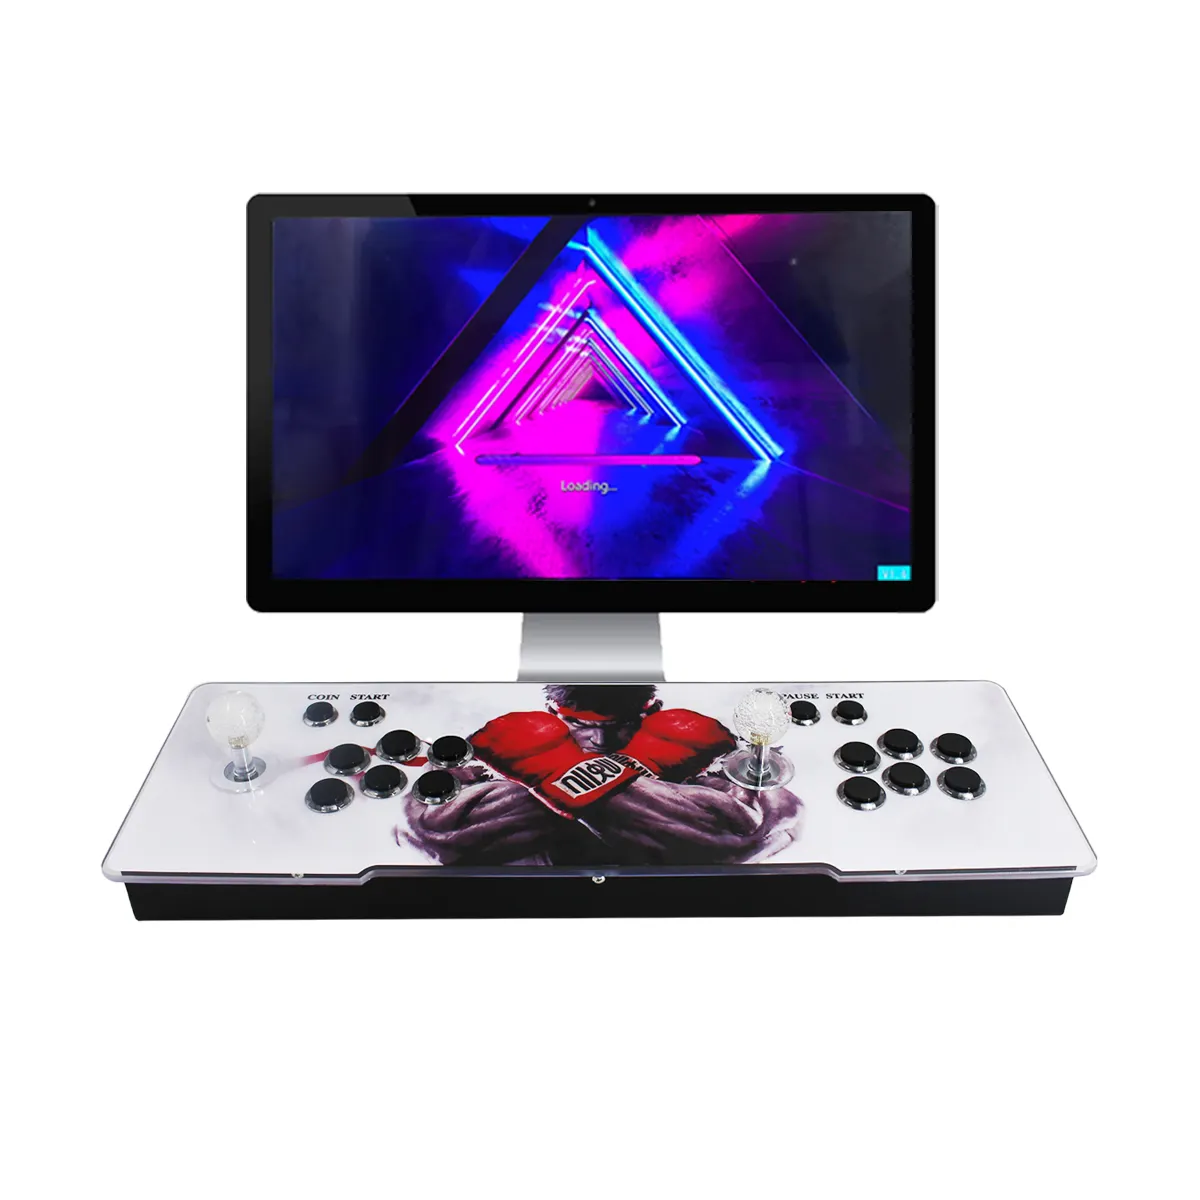 9800 in1 Pandora E-sports Box arcade video games bowling ball game machine wired game controller arcade fighting